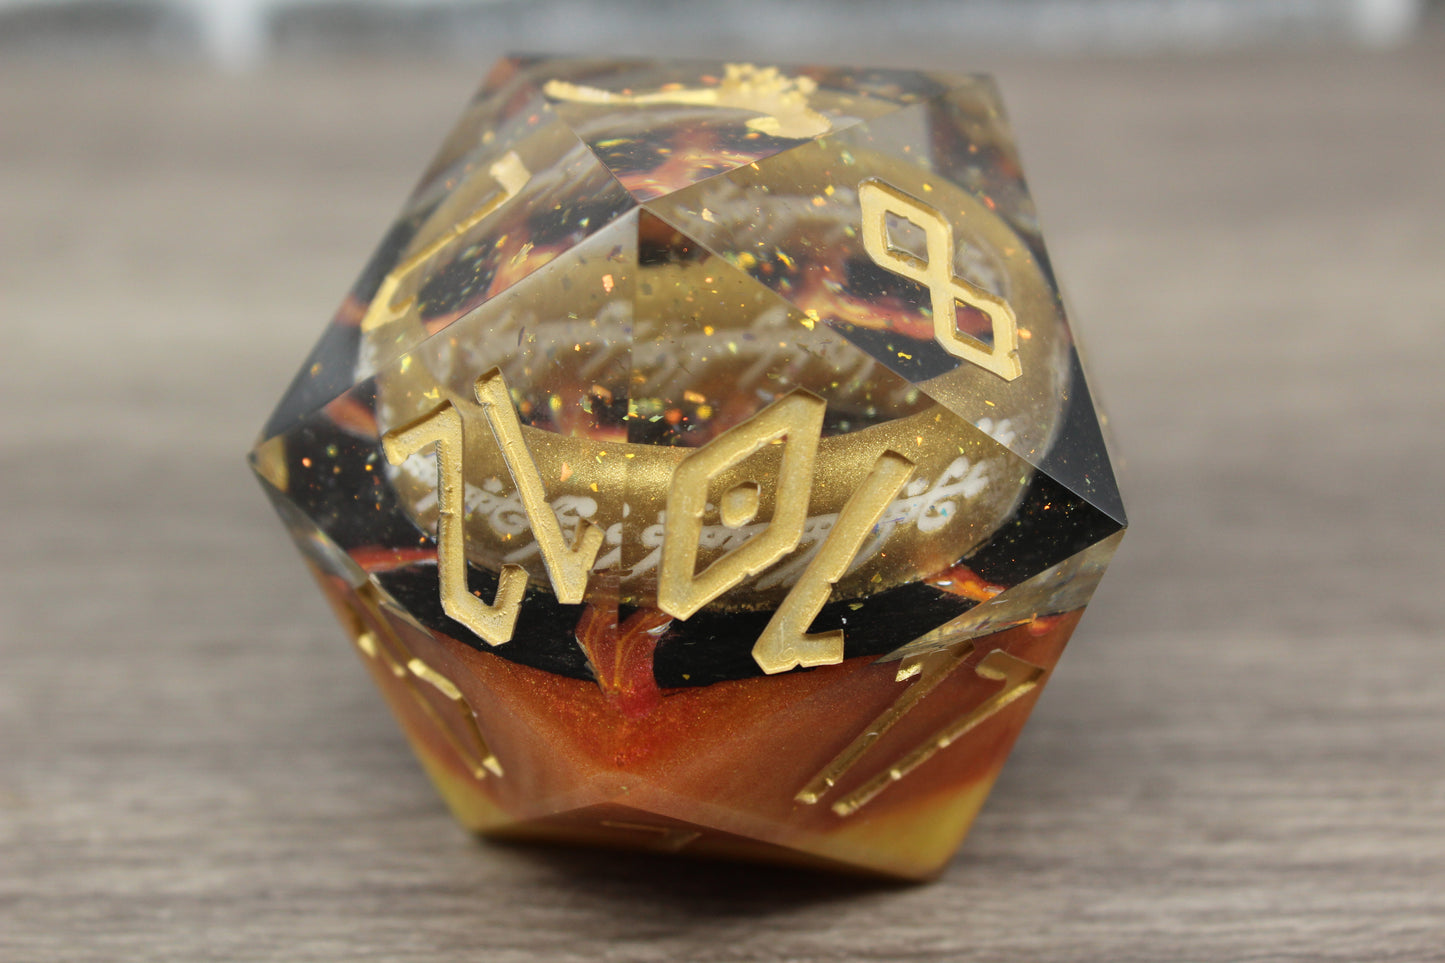 60mm PREORDER The One D20 to Rule Them All